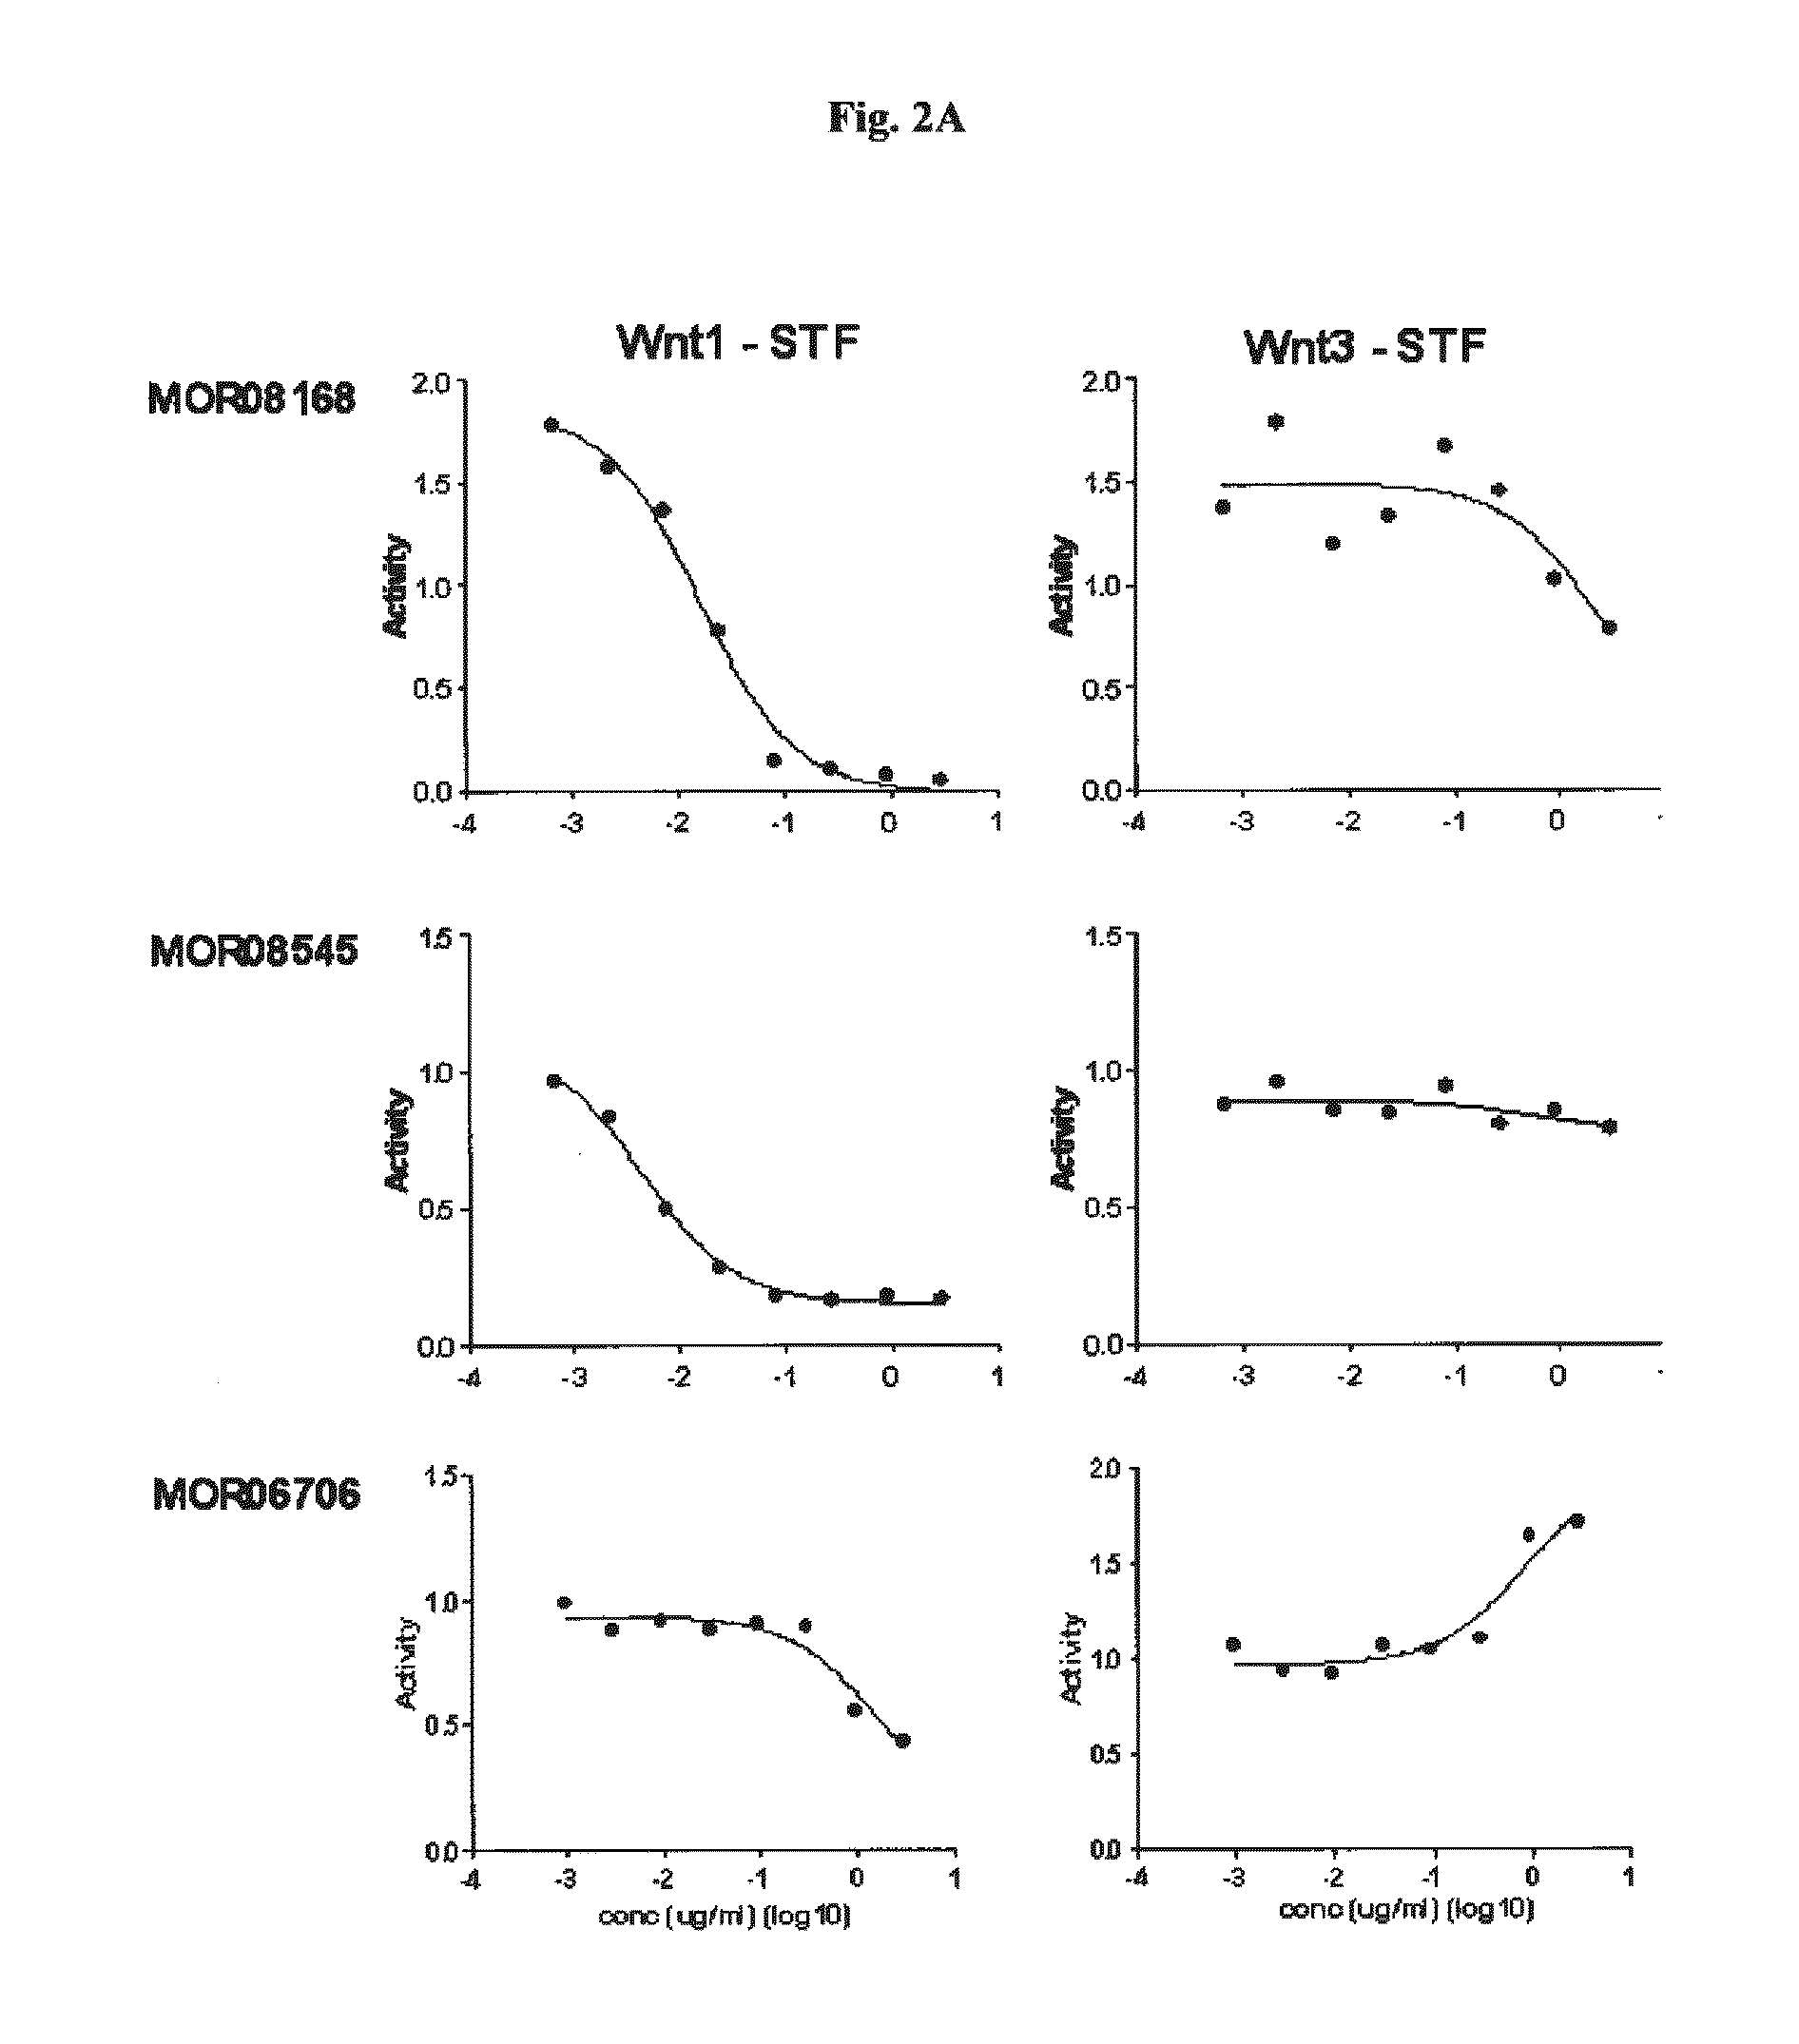 Compositions and methods of use for therapeutic low density lipoprotein - related protein 6 (LRP6) multivalent antibodies